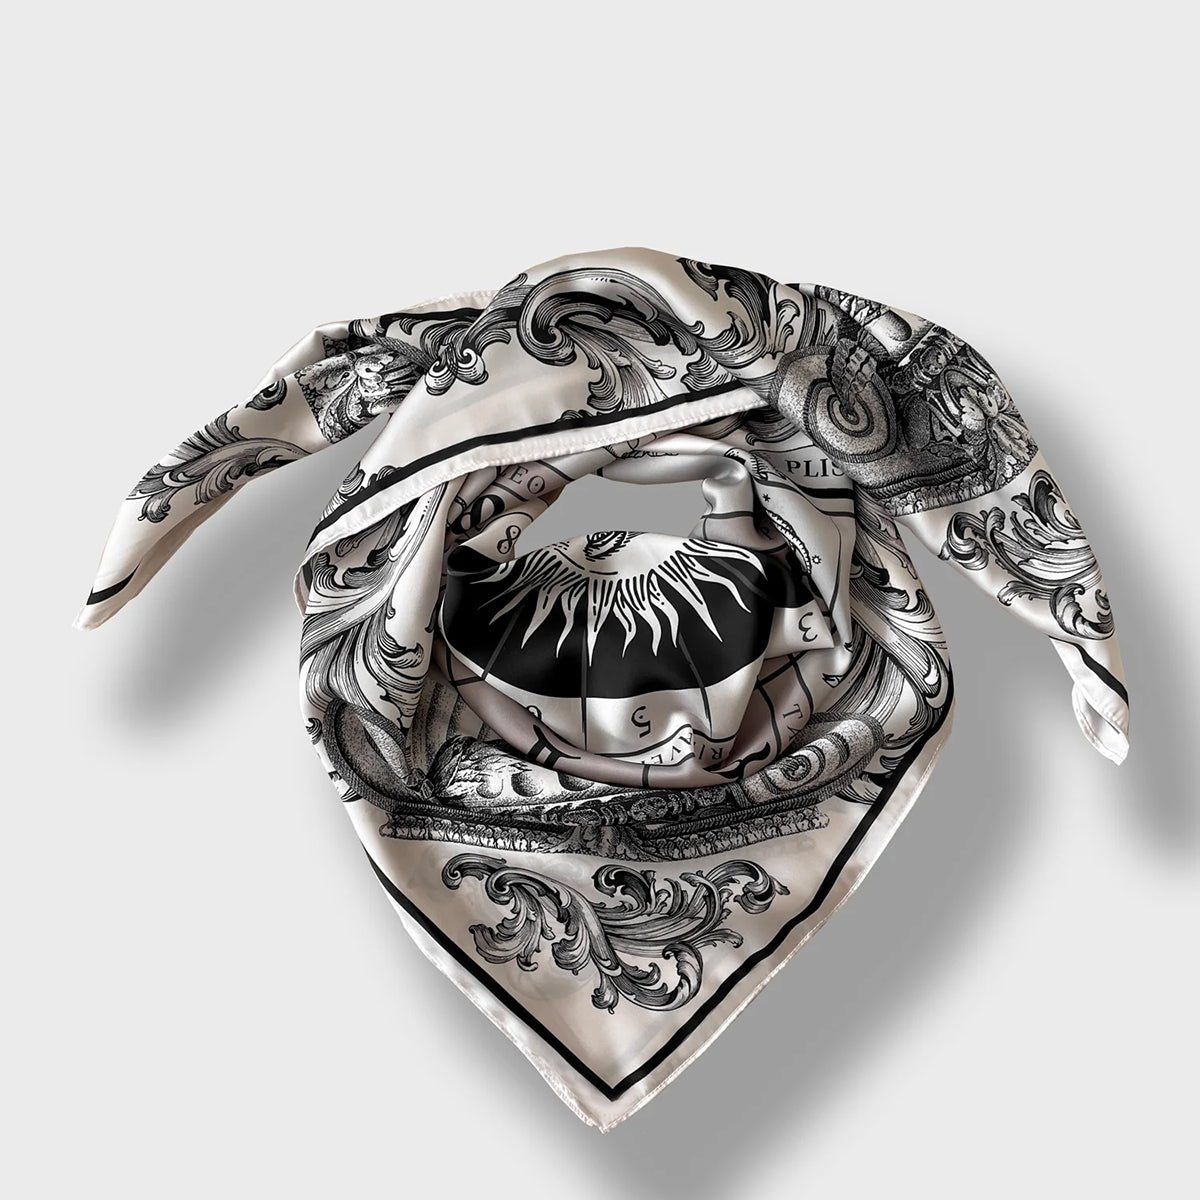 The neutral-toned Astro scarf featuring 12 zodiac signs surrounding a radiant sun wrapped as if on neck on plain background.